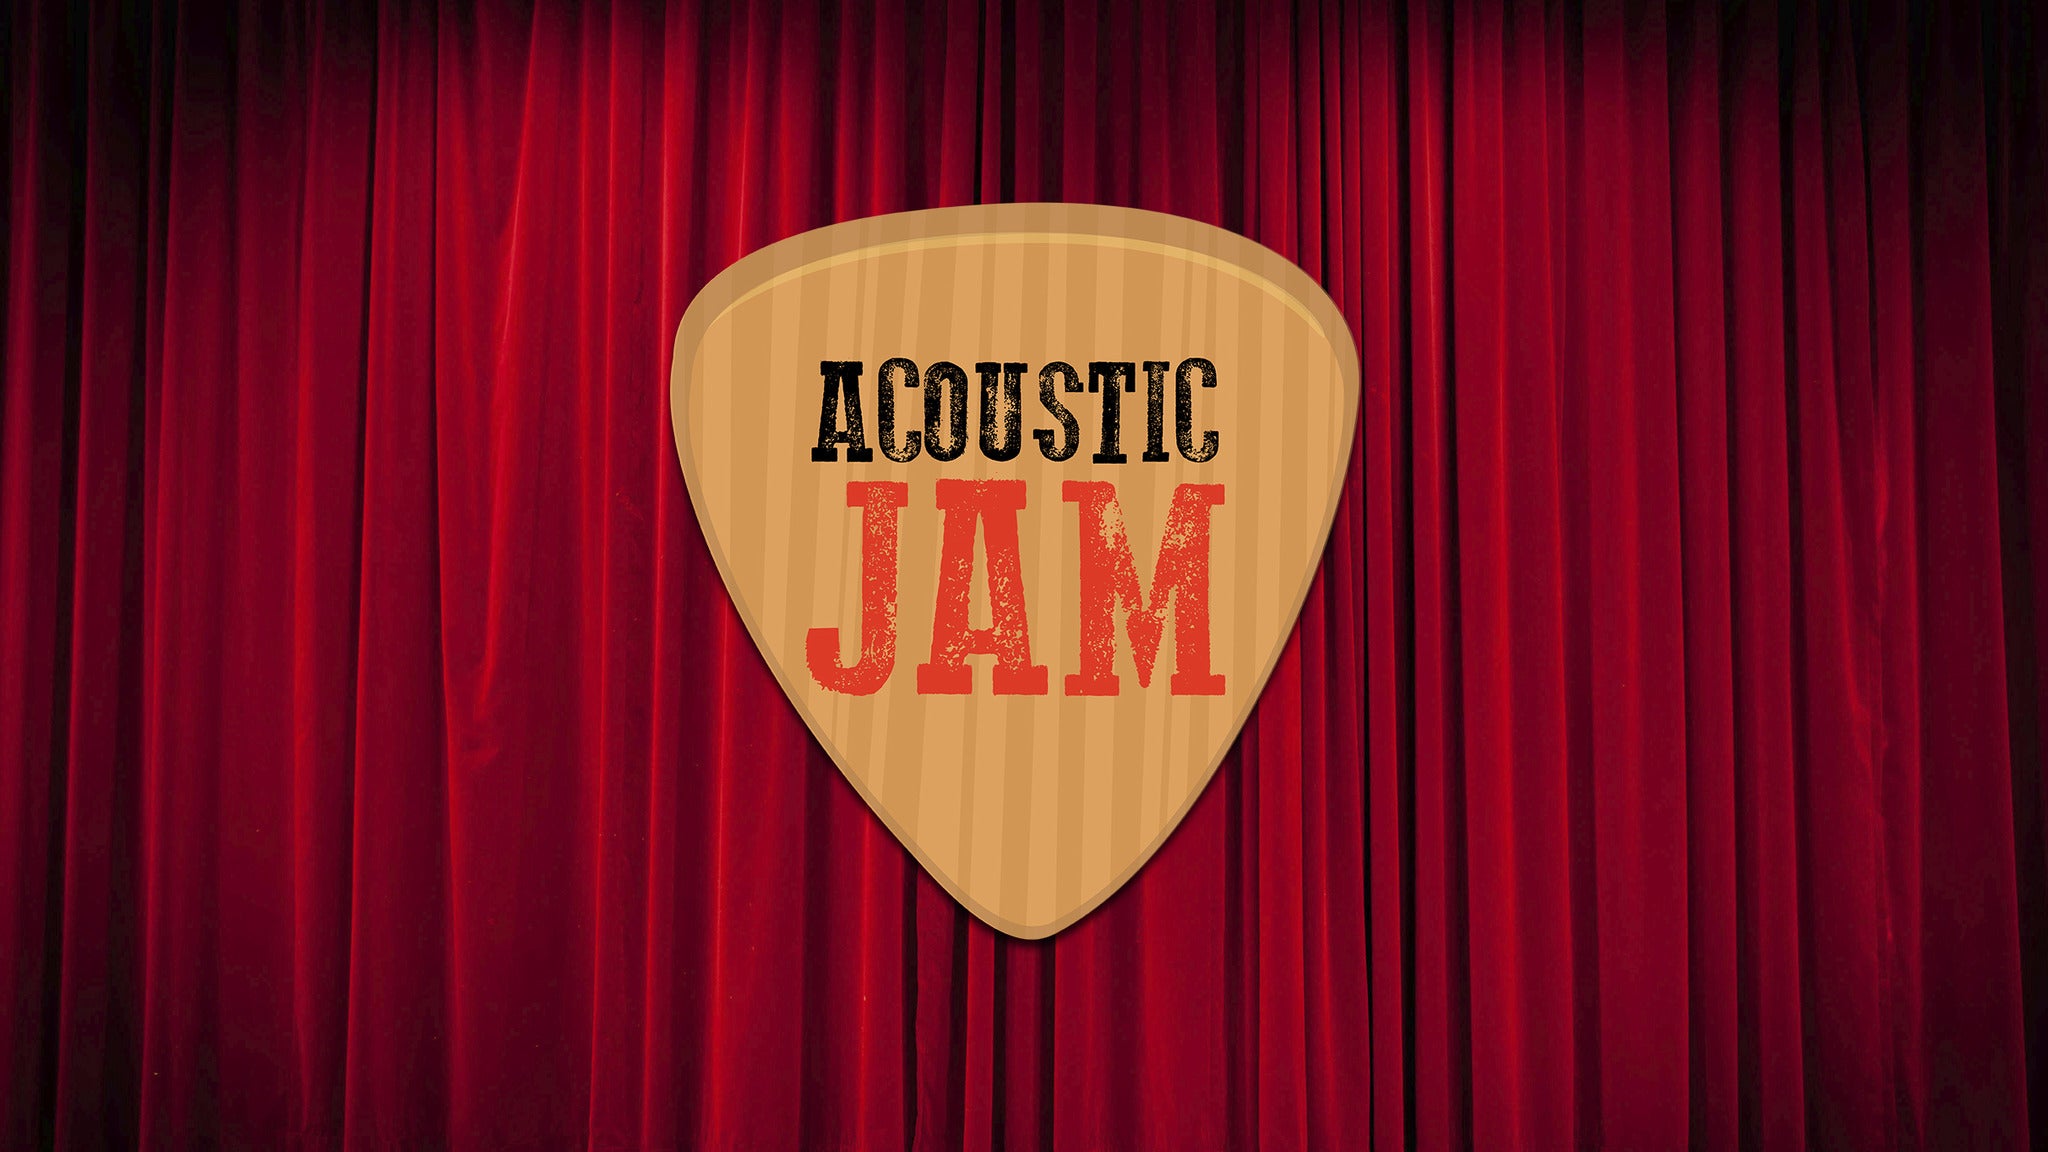 Acoustic Jam 2022 presented by 97.5 WAMZ and KCC Heating and Cooling in Louisville promo photo for Official Platinum presale offer code